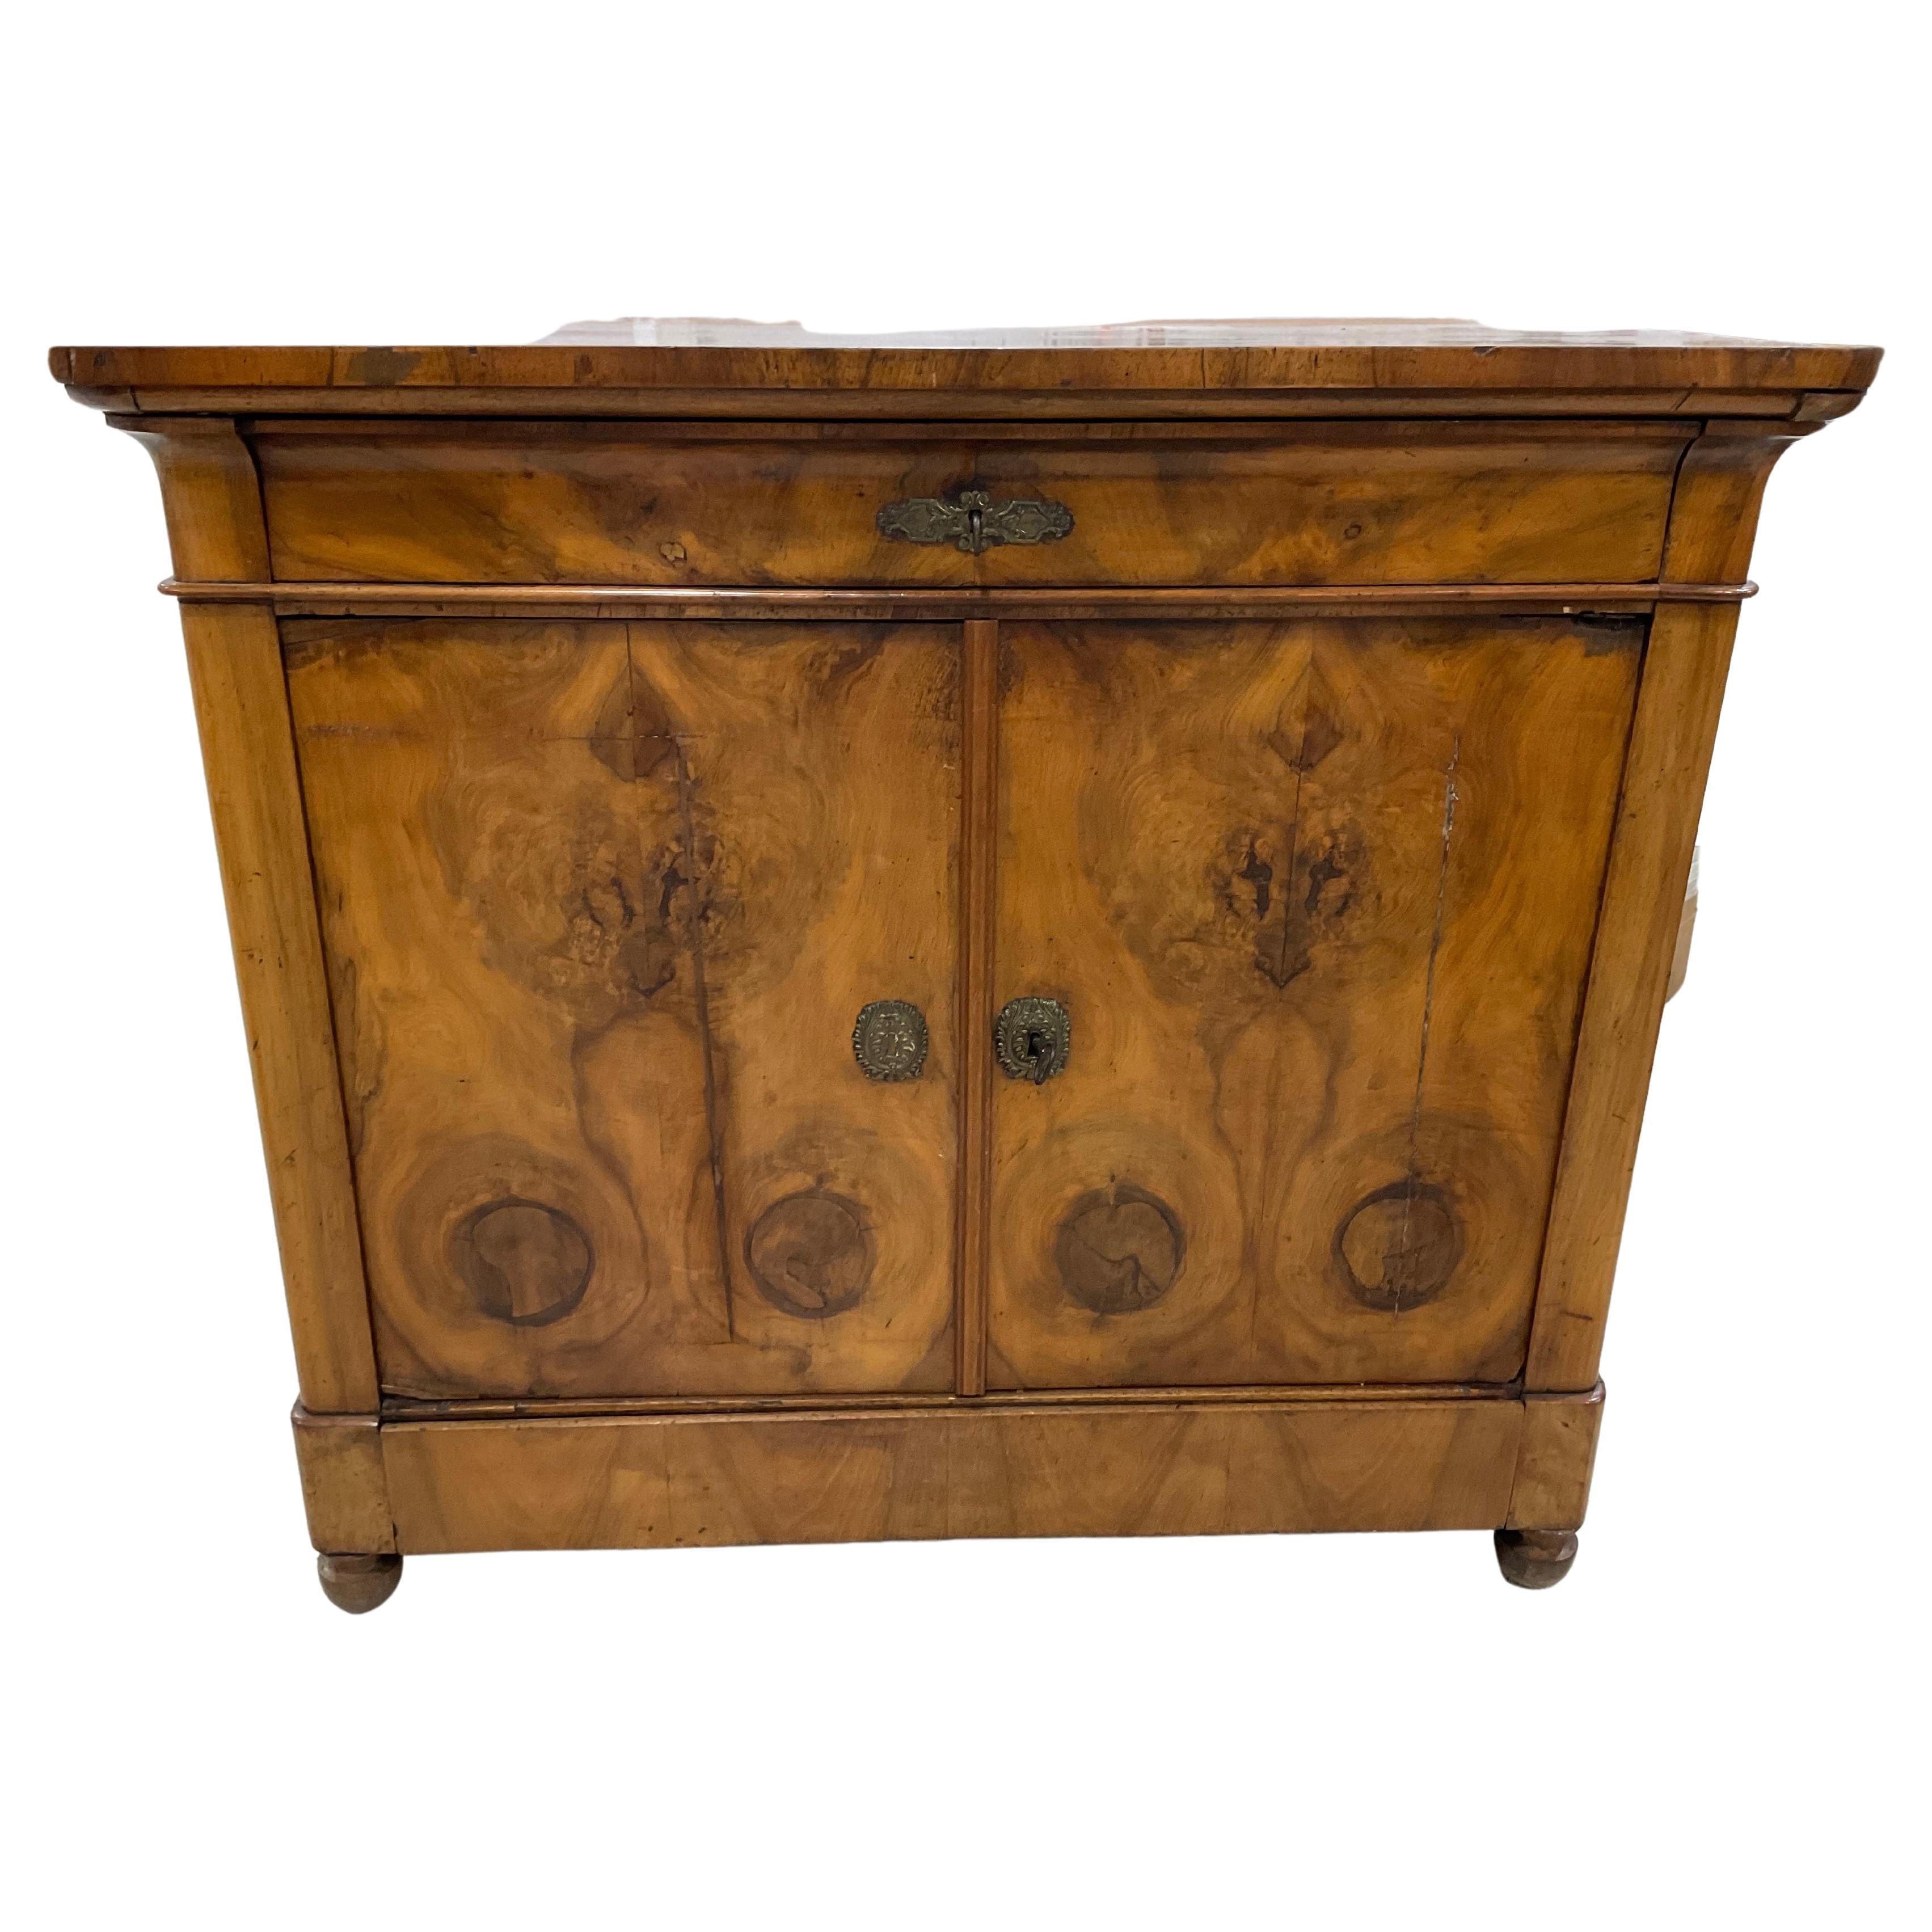 19th Century French Book Matched Walnut Louis Philippe Period Buffet, Sideboard